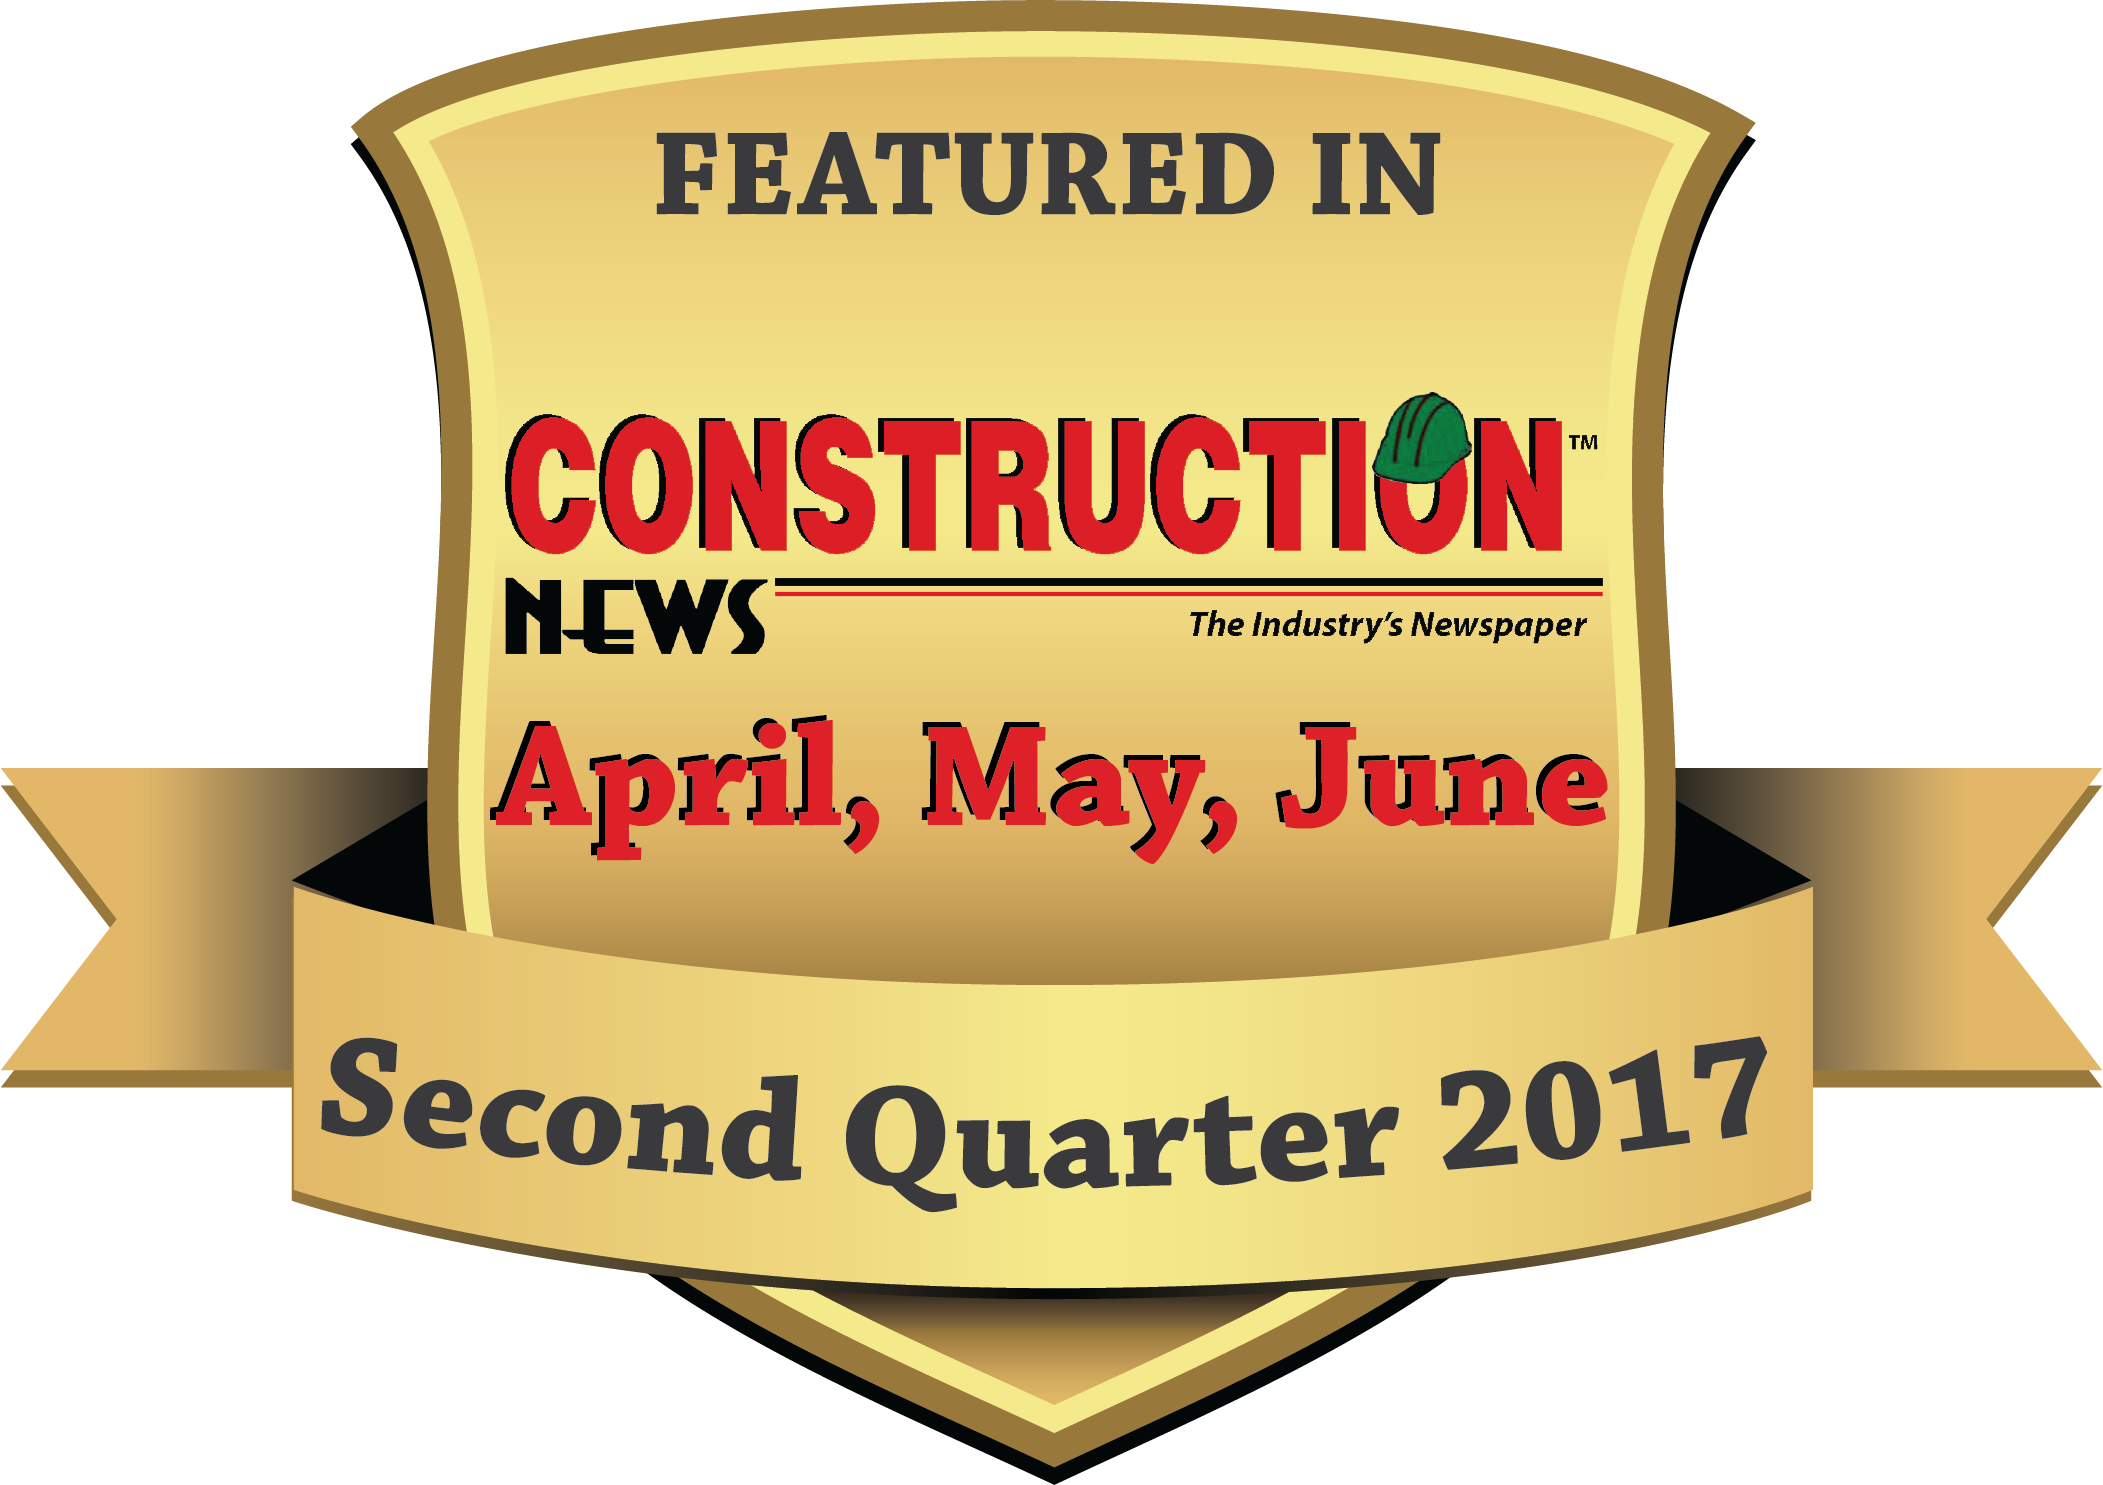 FEATURED IN Construction News